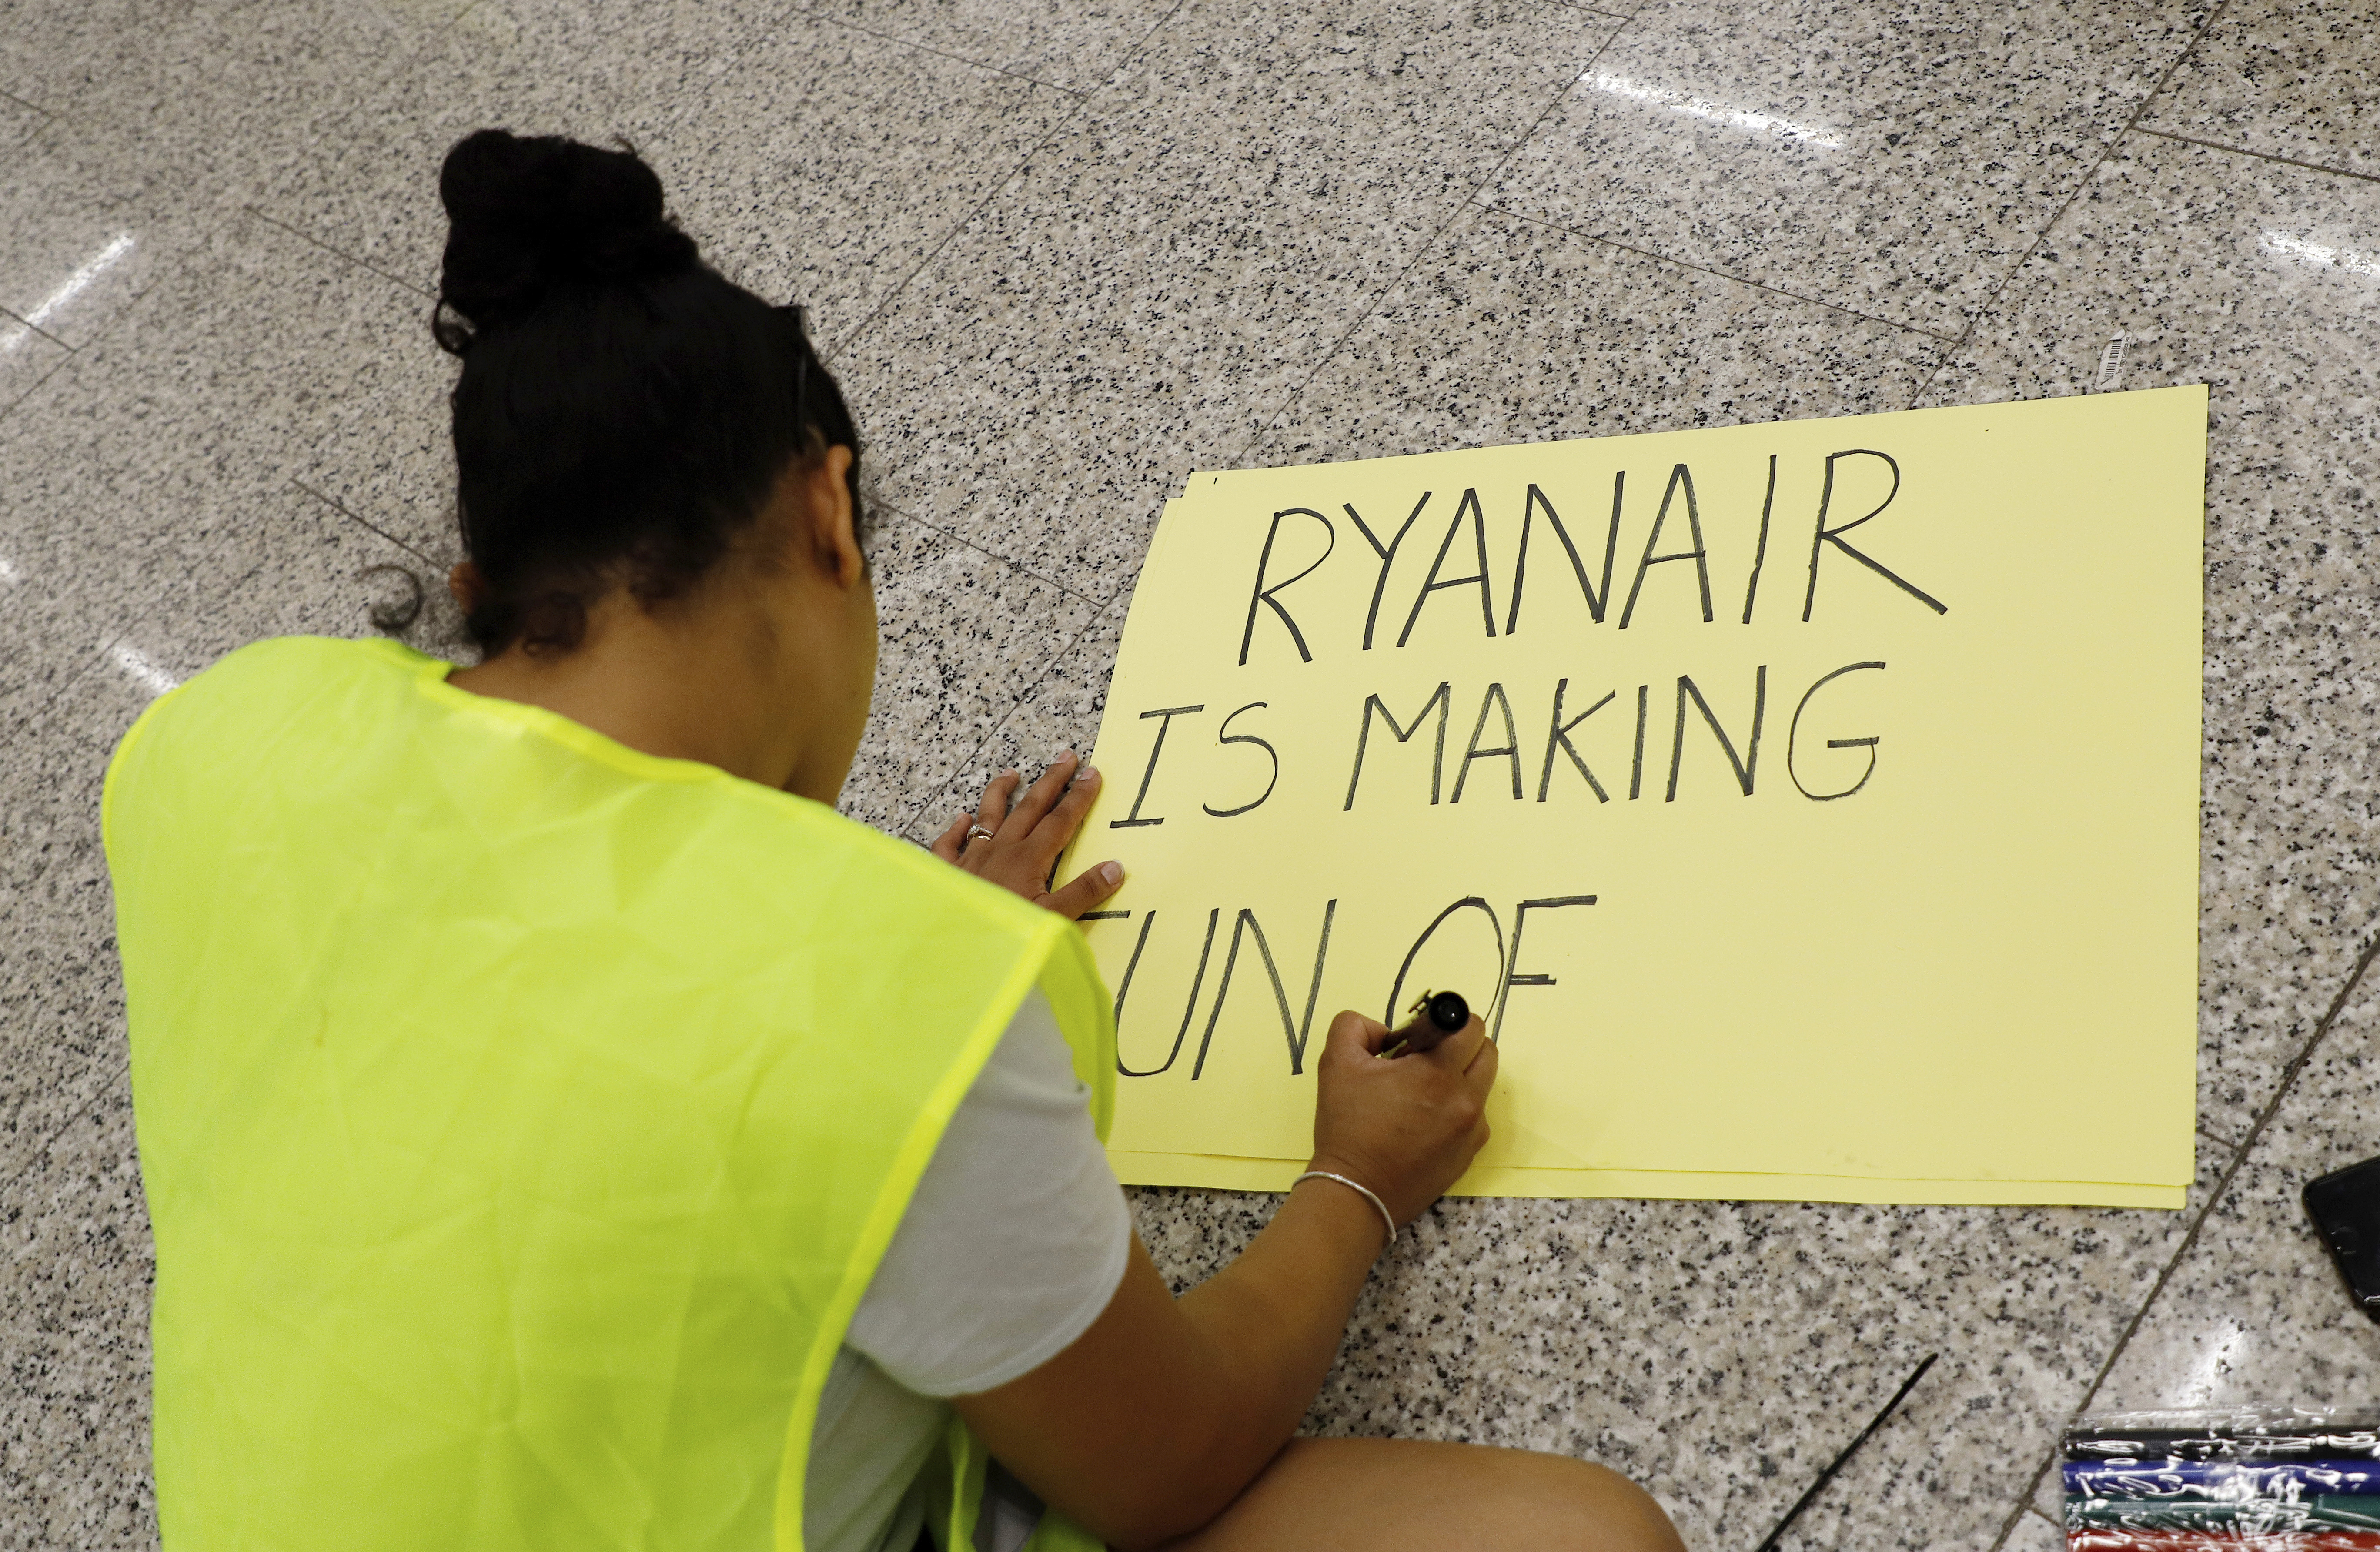 25 July 2018, Spain, Mallorca, Palma: Ryanair cabin crew on a strike at Palma de Mallorca airport demanding more money and better conditions. The start of a two-day strike by cabin crew at the low-cost airline Ryanair has caused great displeasure among countless travellers in several European countries. The highest number of cancellations occurred in Spain, where Ryanair cancelled 200 flights - just under a quarter of all its flights. In Mallorca alone, 72 flights were cancelled among which were 10 of the 40 heading to Germany on 25 July 2018 due to the strike. Photo by: Clara Margais/picture-alliance/dpa/AP Images